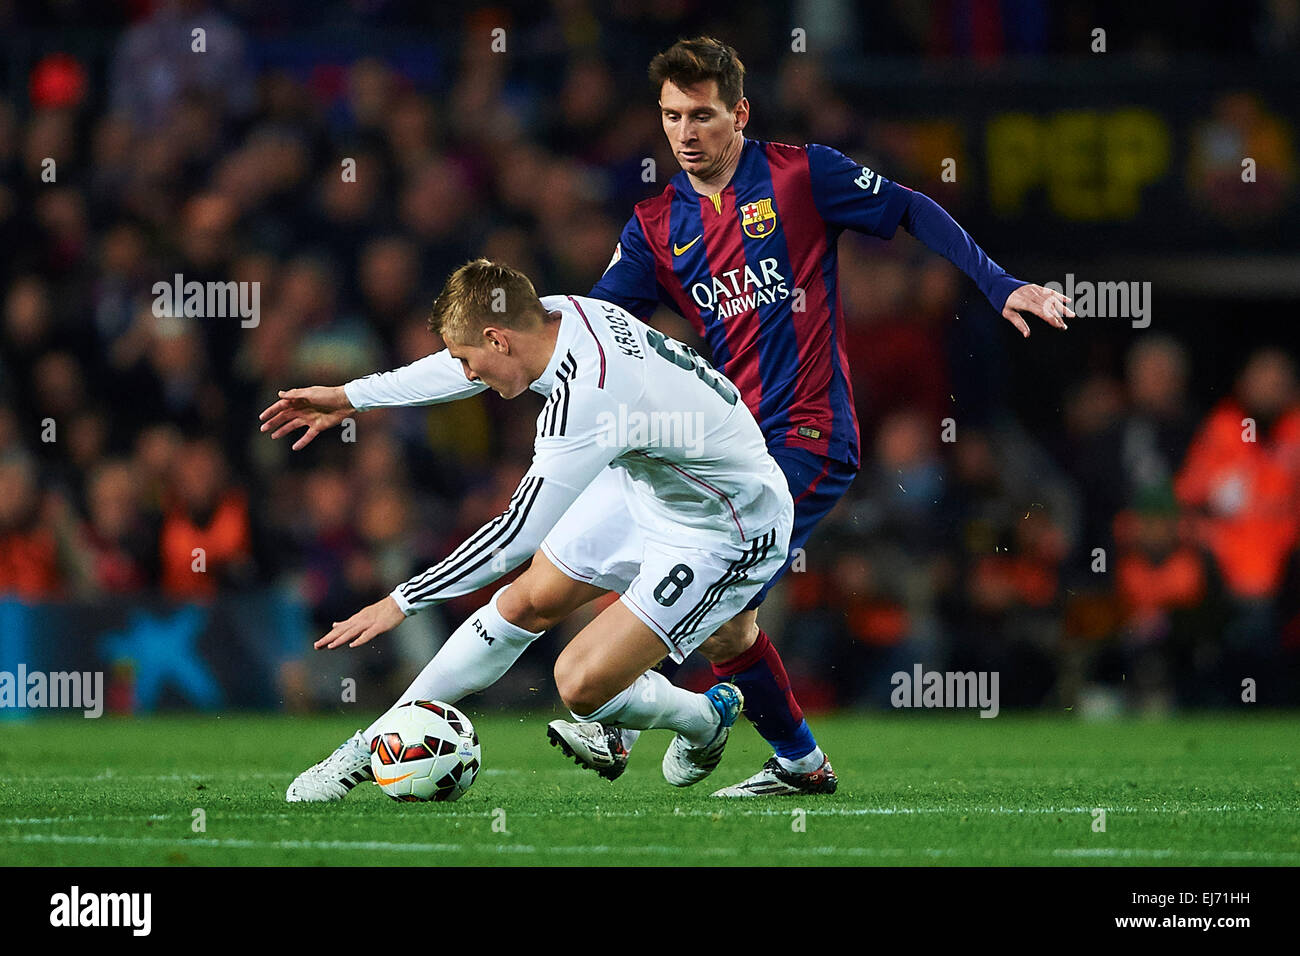 Toni Kroos (Real Madrid CF) duels for the ball against Lionel Messi (FC Barcelona), during La Liga soccer match between FC Barcelona and Real Madrid CF, at the Camp Nou stadium in Barcelona, Spain, Sunday, march 22, 2015. Foto: S.Lau Stock Photo